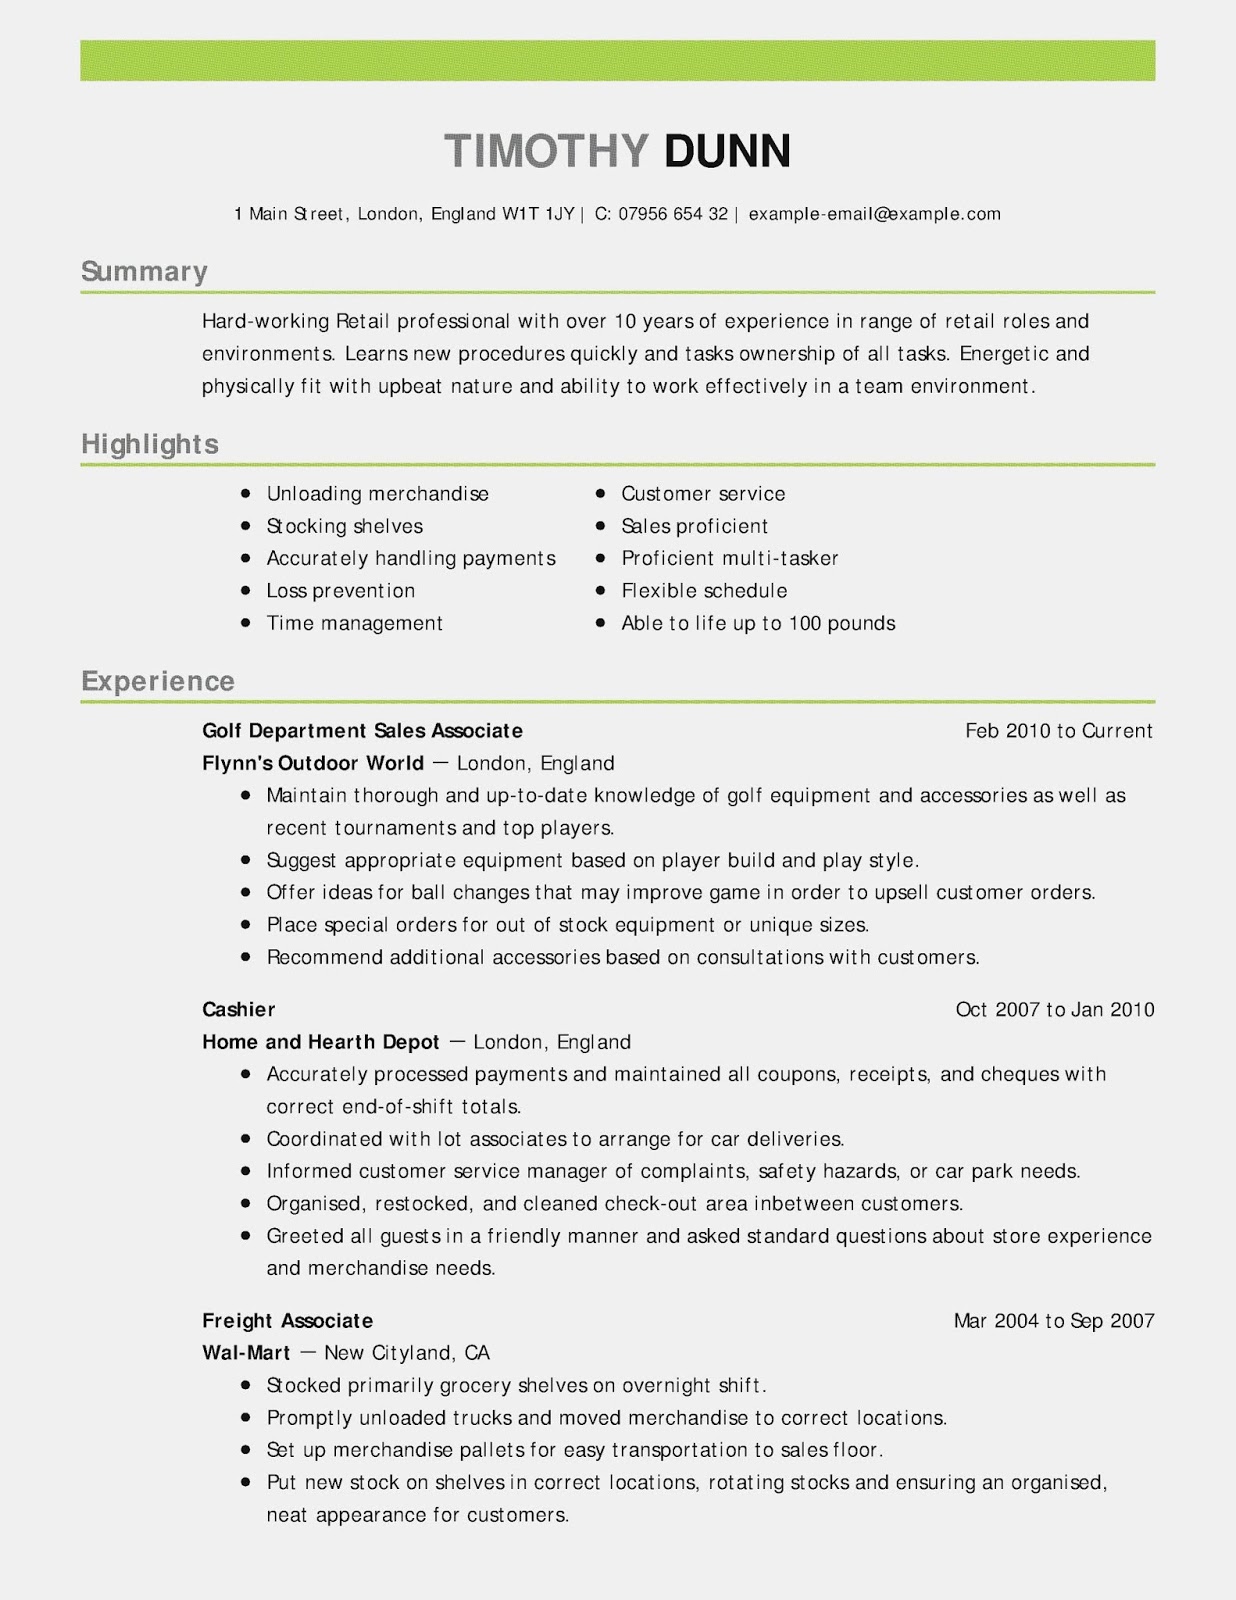 sales manager resume examples, sales manager resume examples 2020, sales manager resume examples 2019, sales manager resume examples 2018, sales manager resume examples 2017, sales manager resume examples australia, sales manager sample resume,